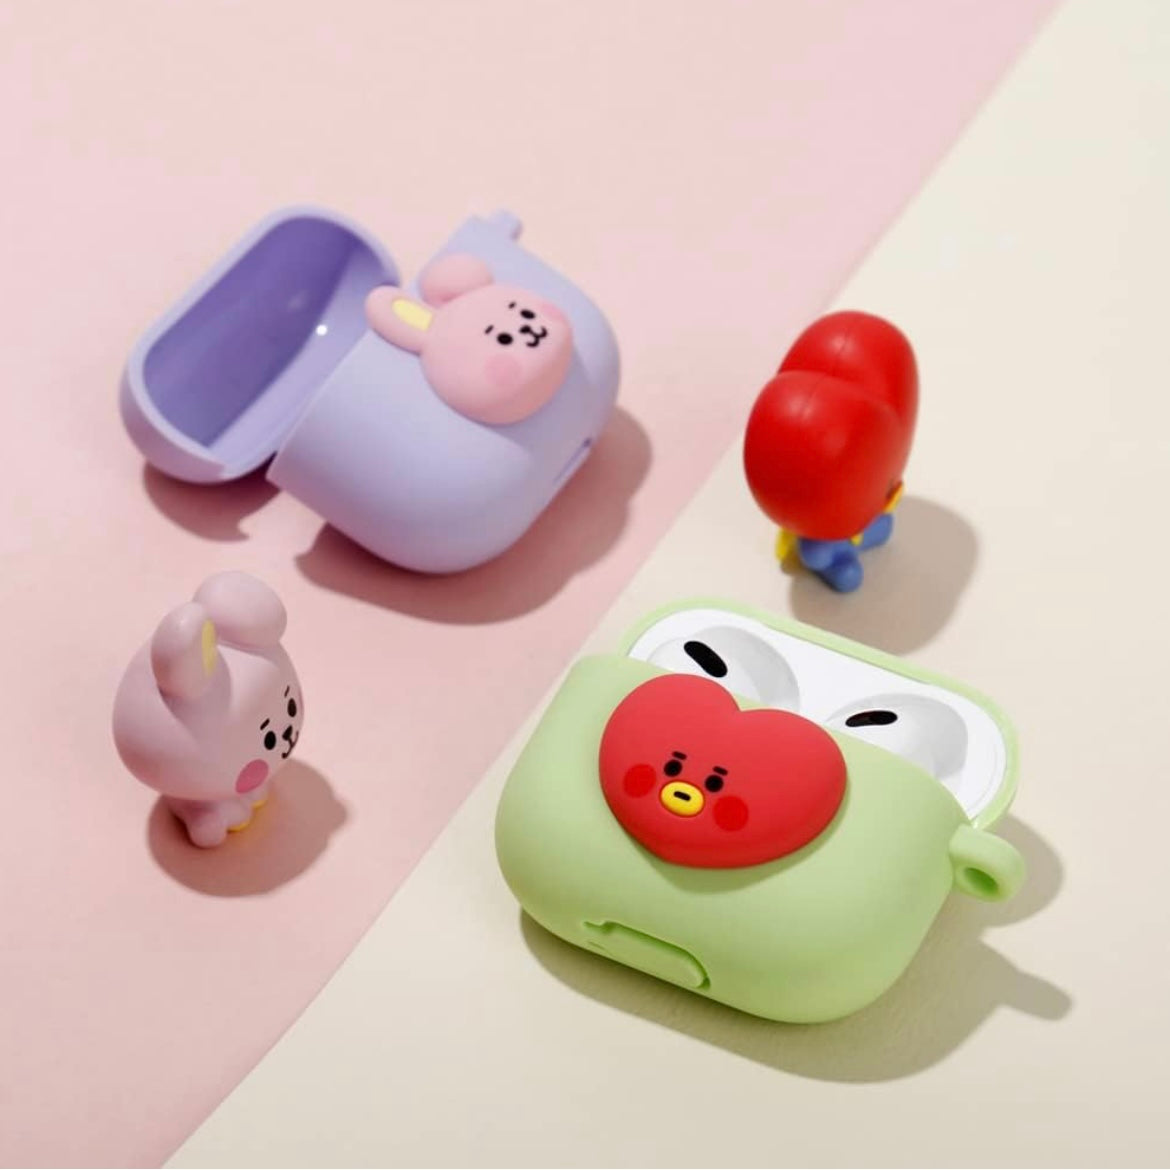 BT21 Apple AirPods 3 Silicone Case